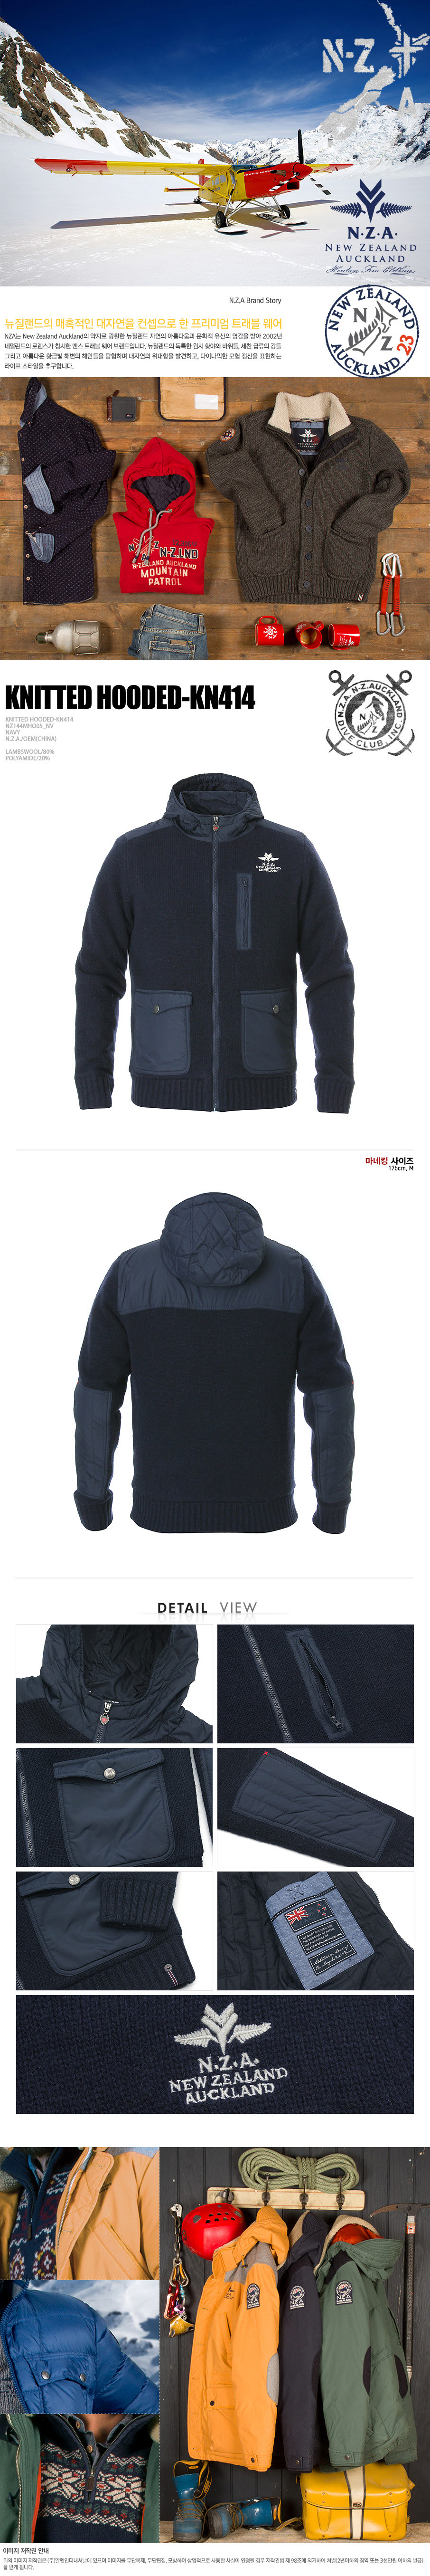 [N.Z.A] Knitted Hooded-KN414 (14KN414C) - NAVY